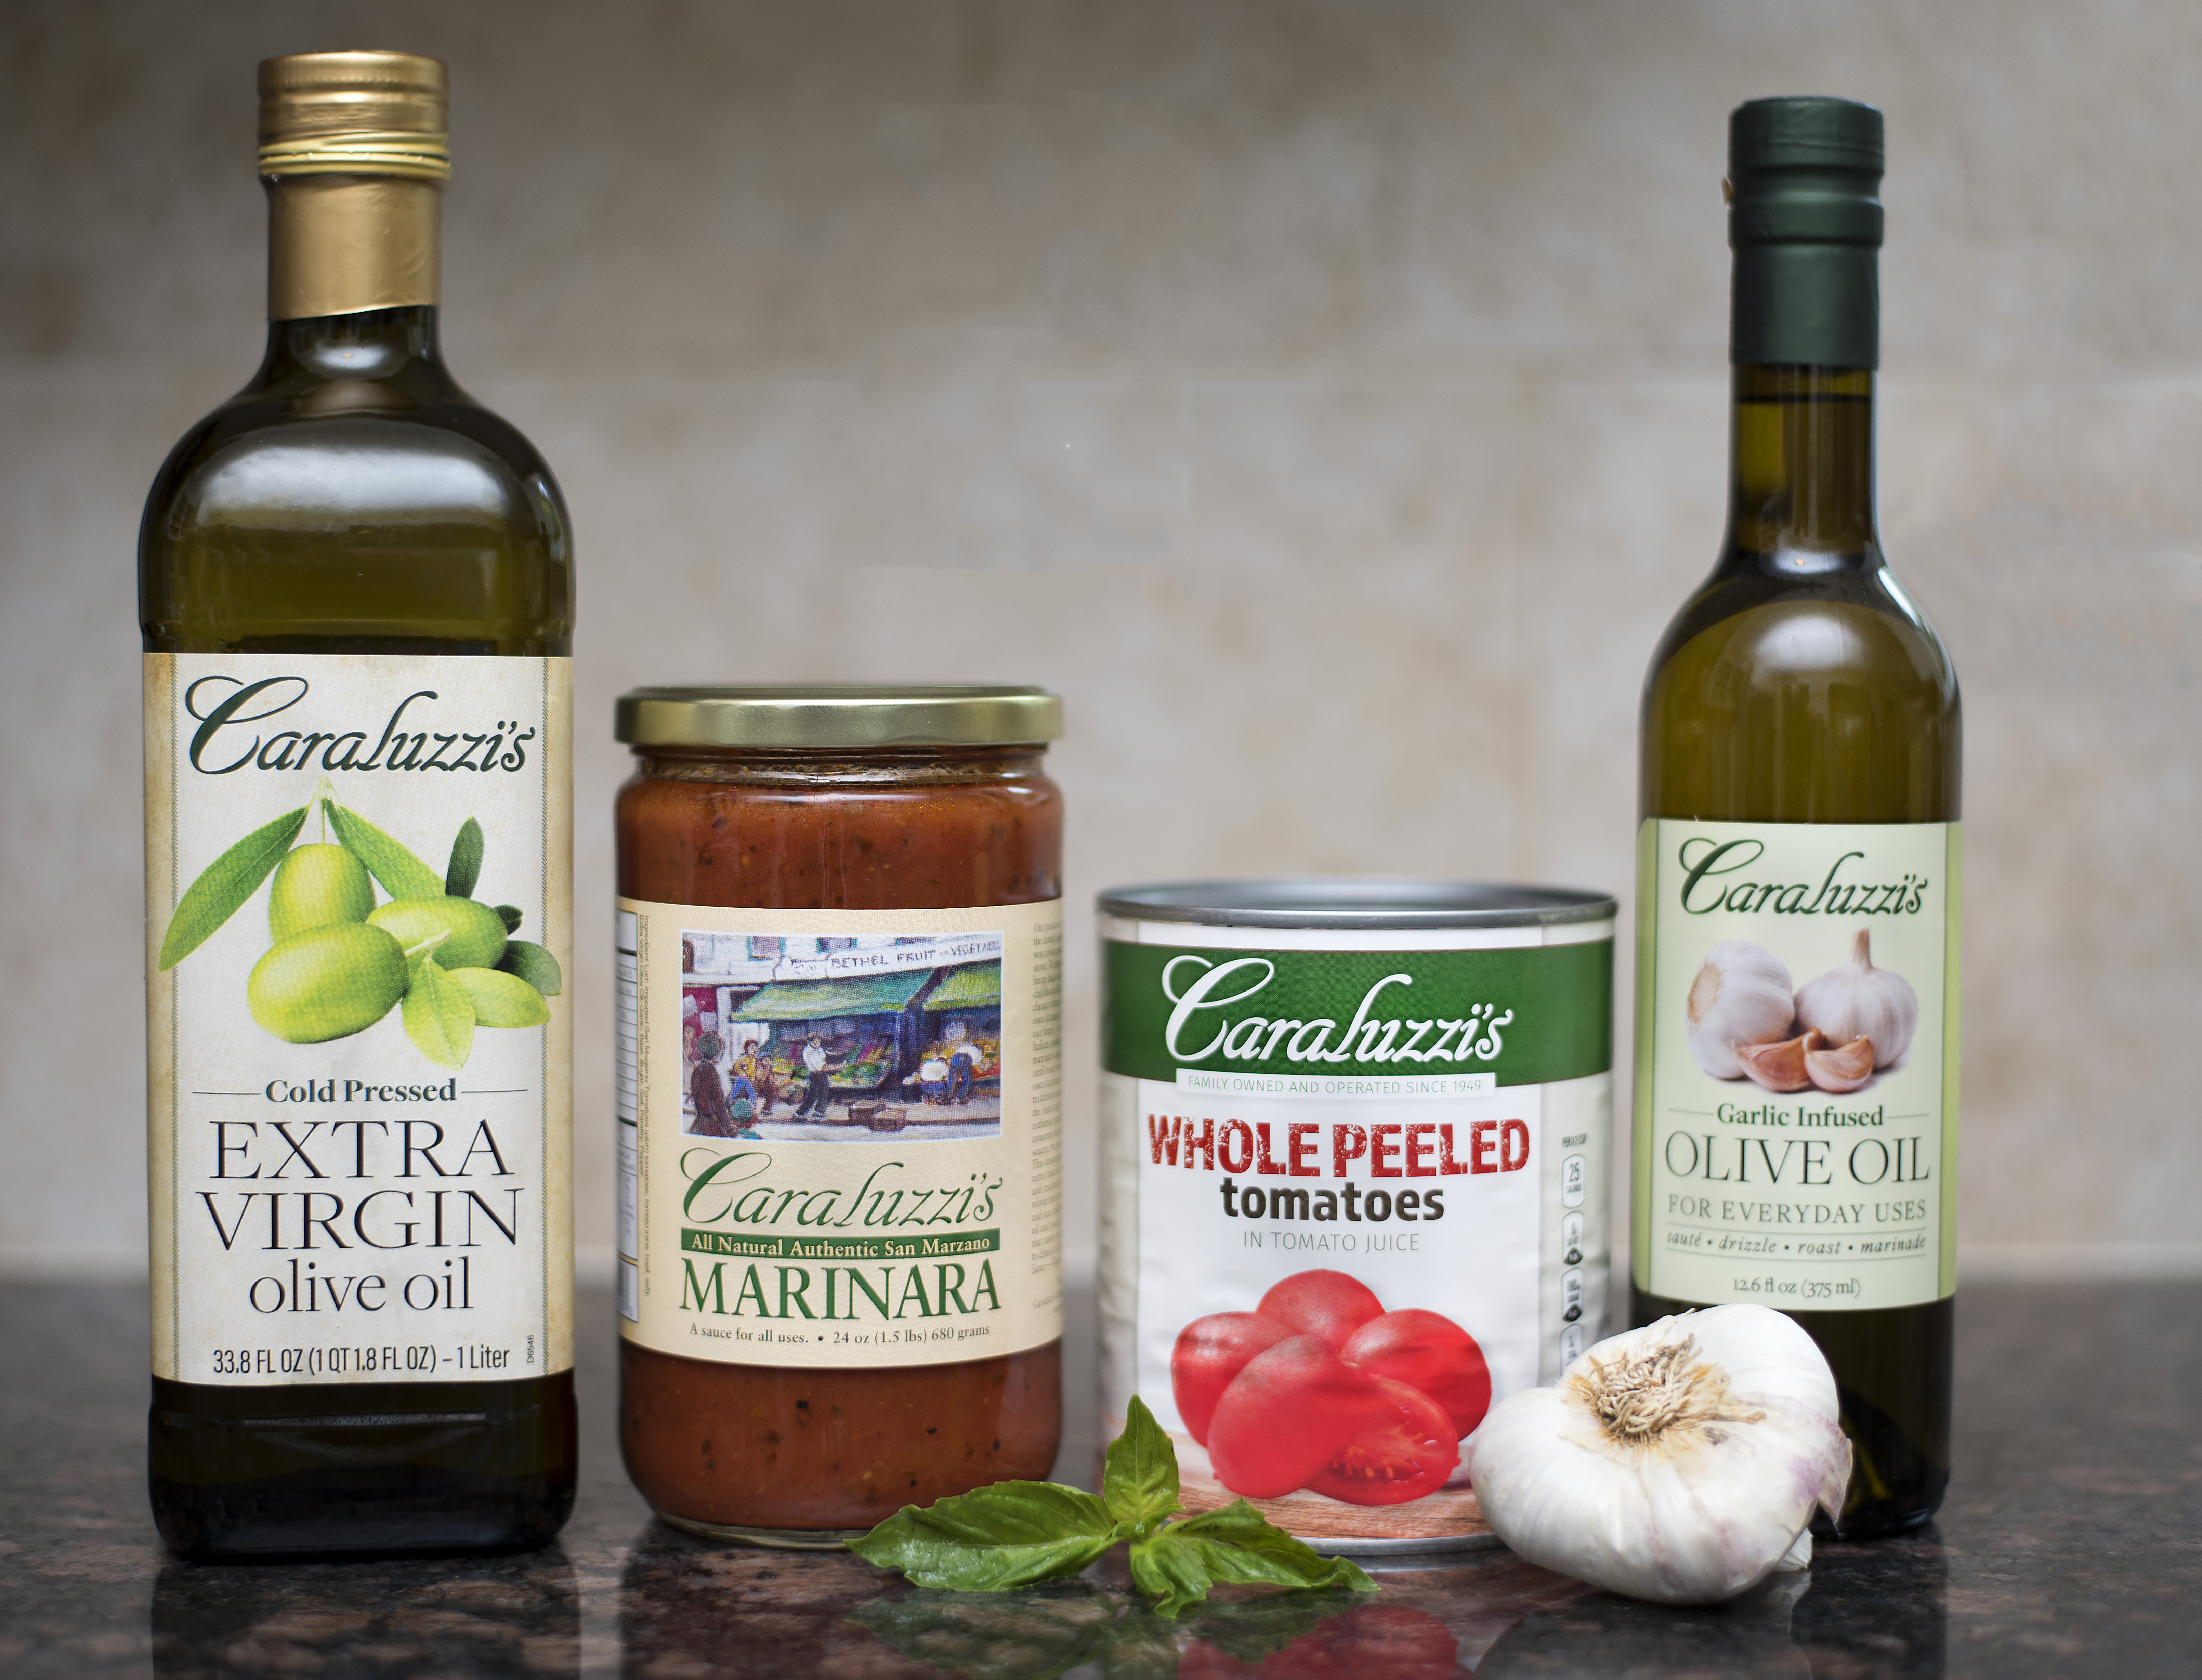 Caraluzzi's Extra Virgin Olive Oil, Marinara Sauce, Whole Peeled Tomatoes, and Flavored Olive Oil